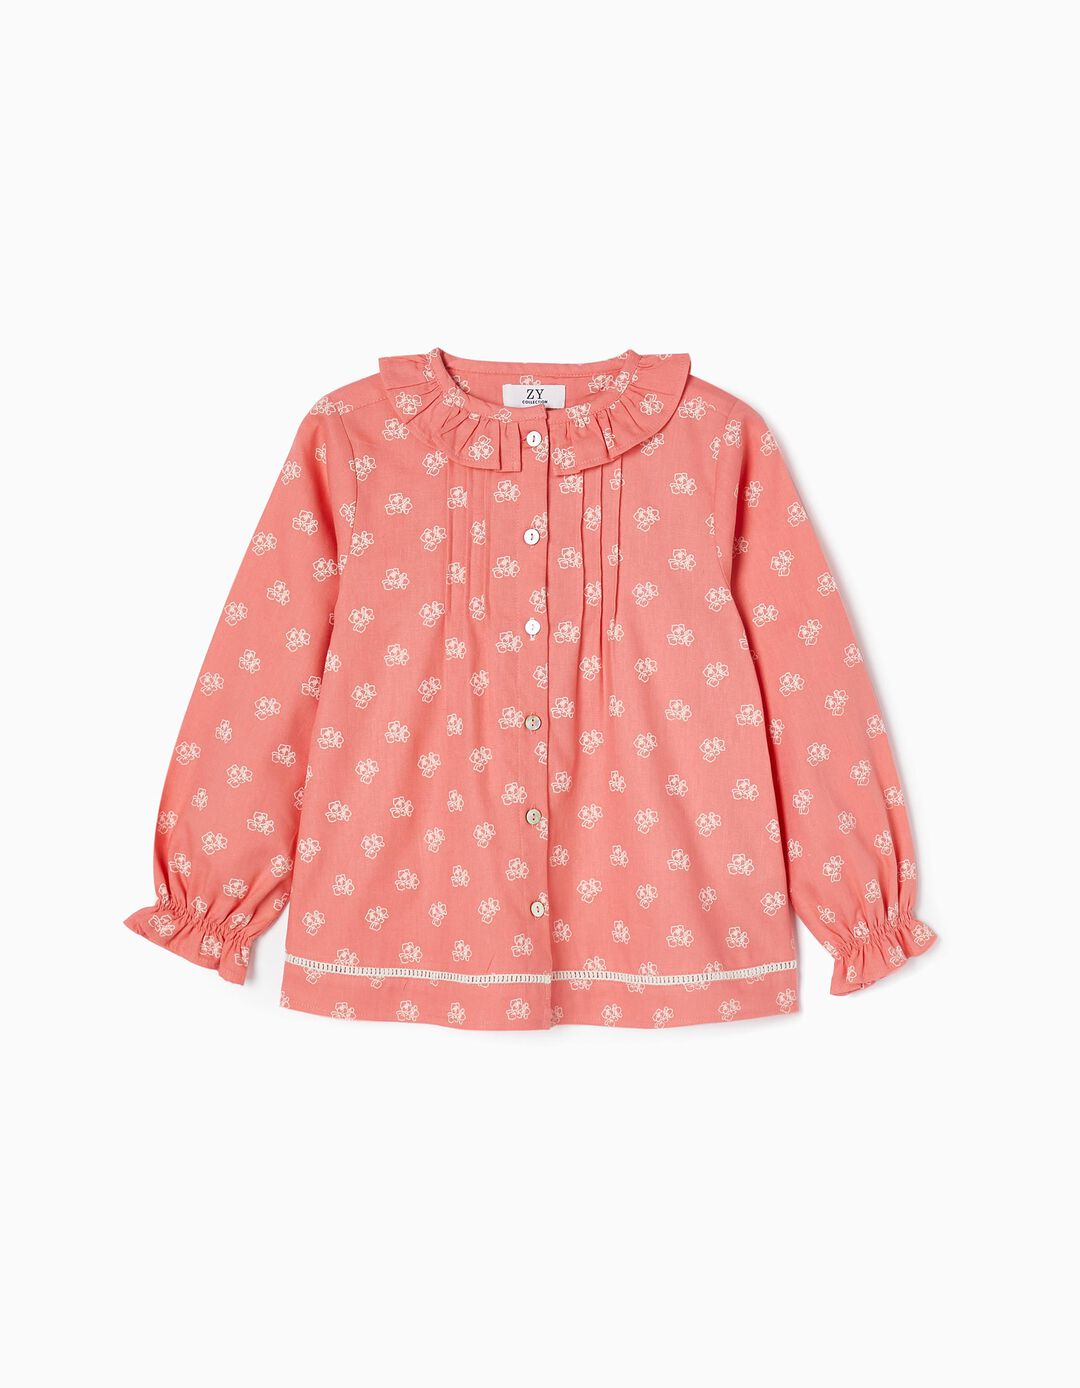 Cotton Floral Shirt for Girls, Coral